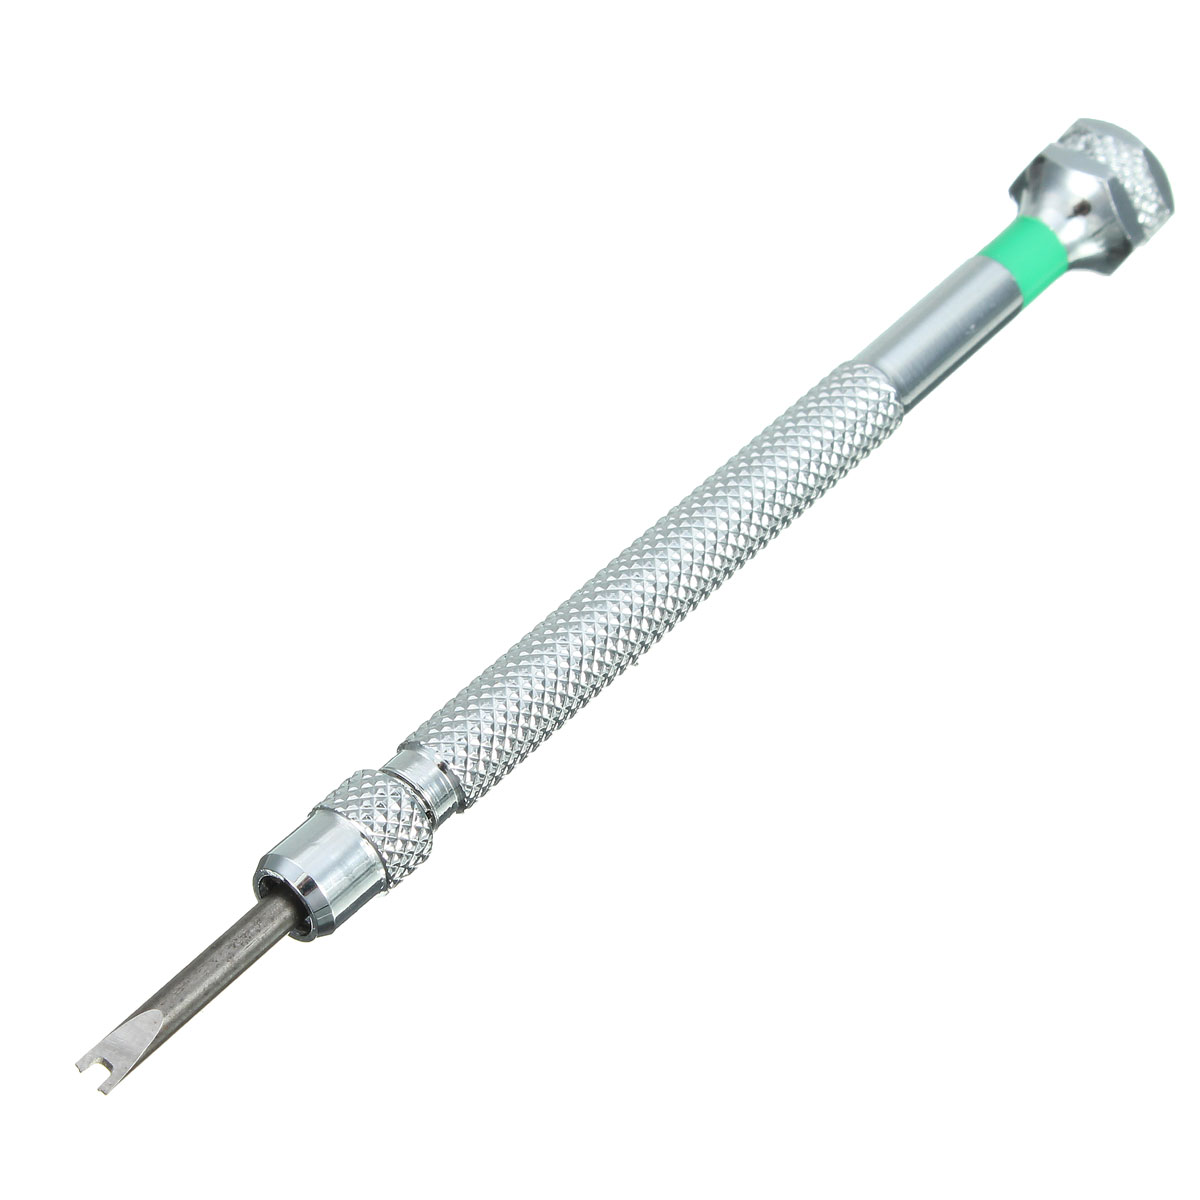 15mm-H-Screwdriver-for-Hublot-Watch-Strap-Buckle-V-Remover-Special-Repair-Tool-1098556